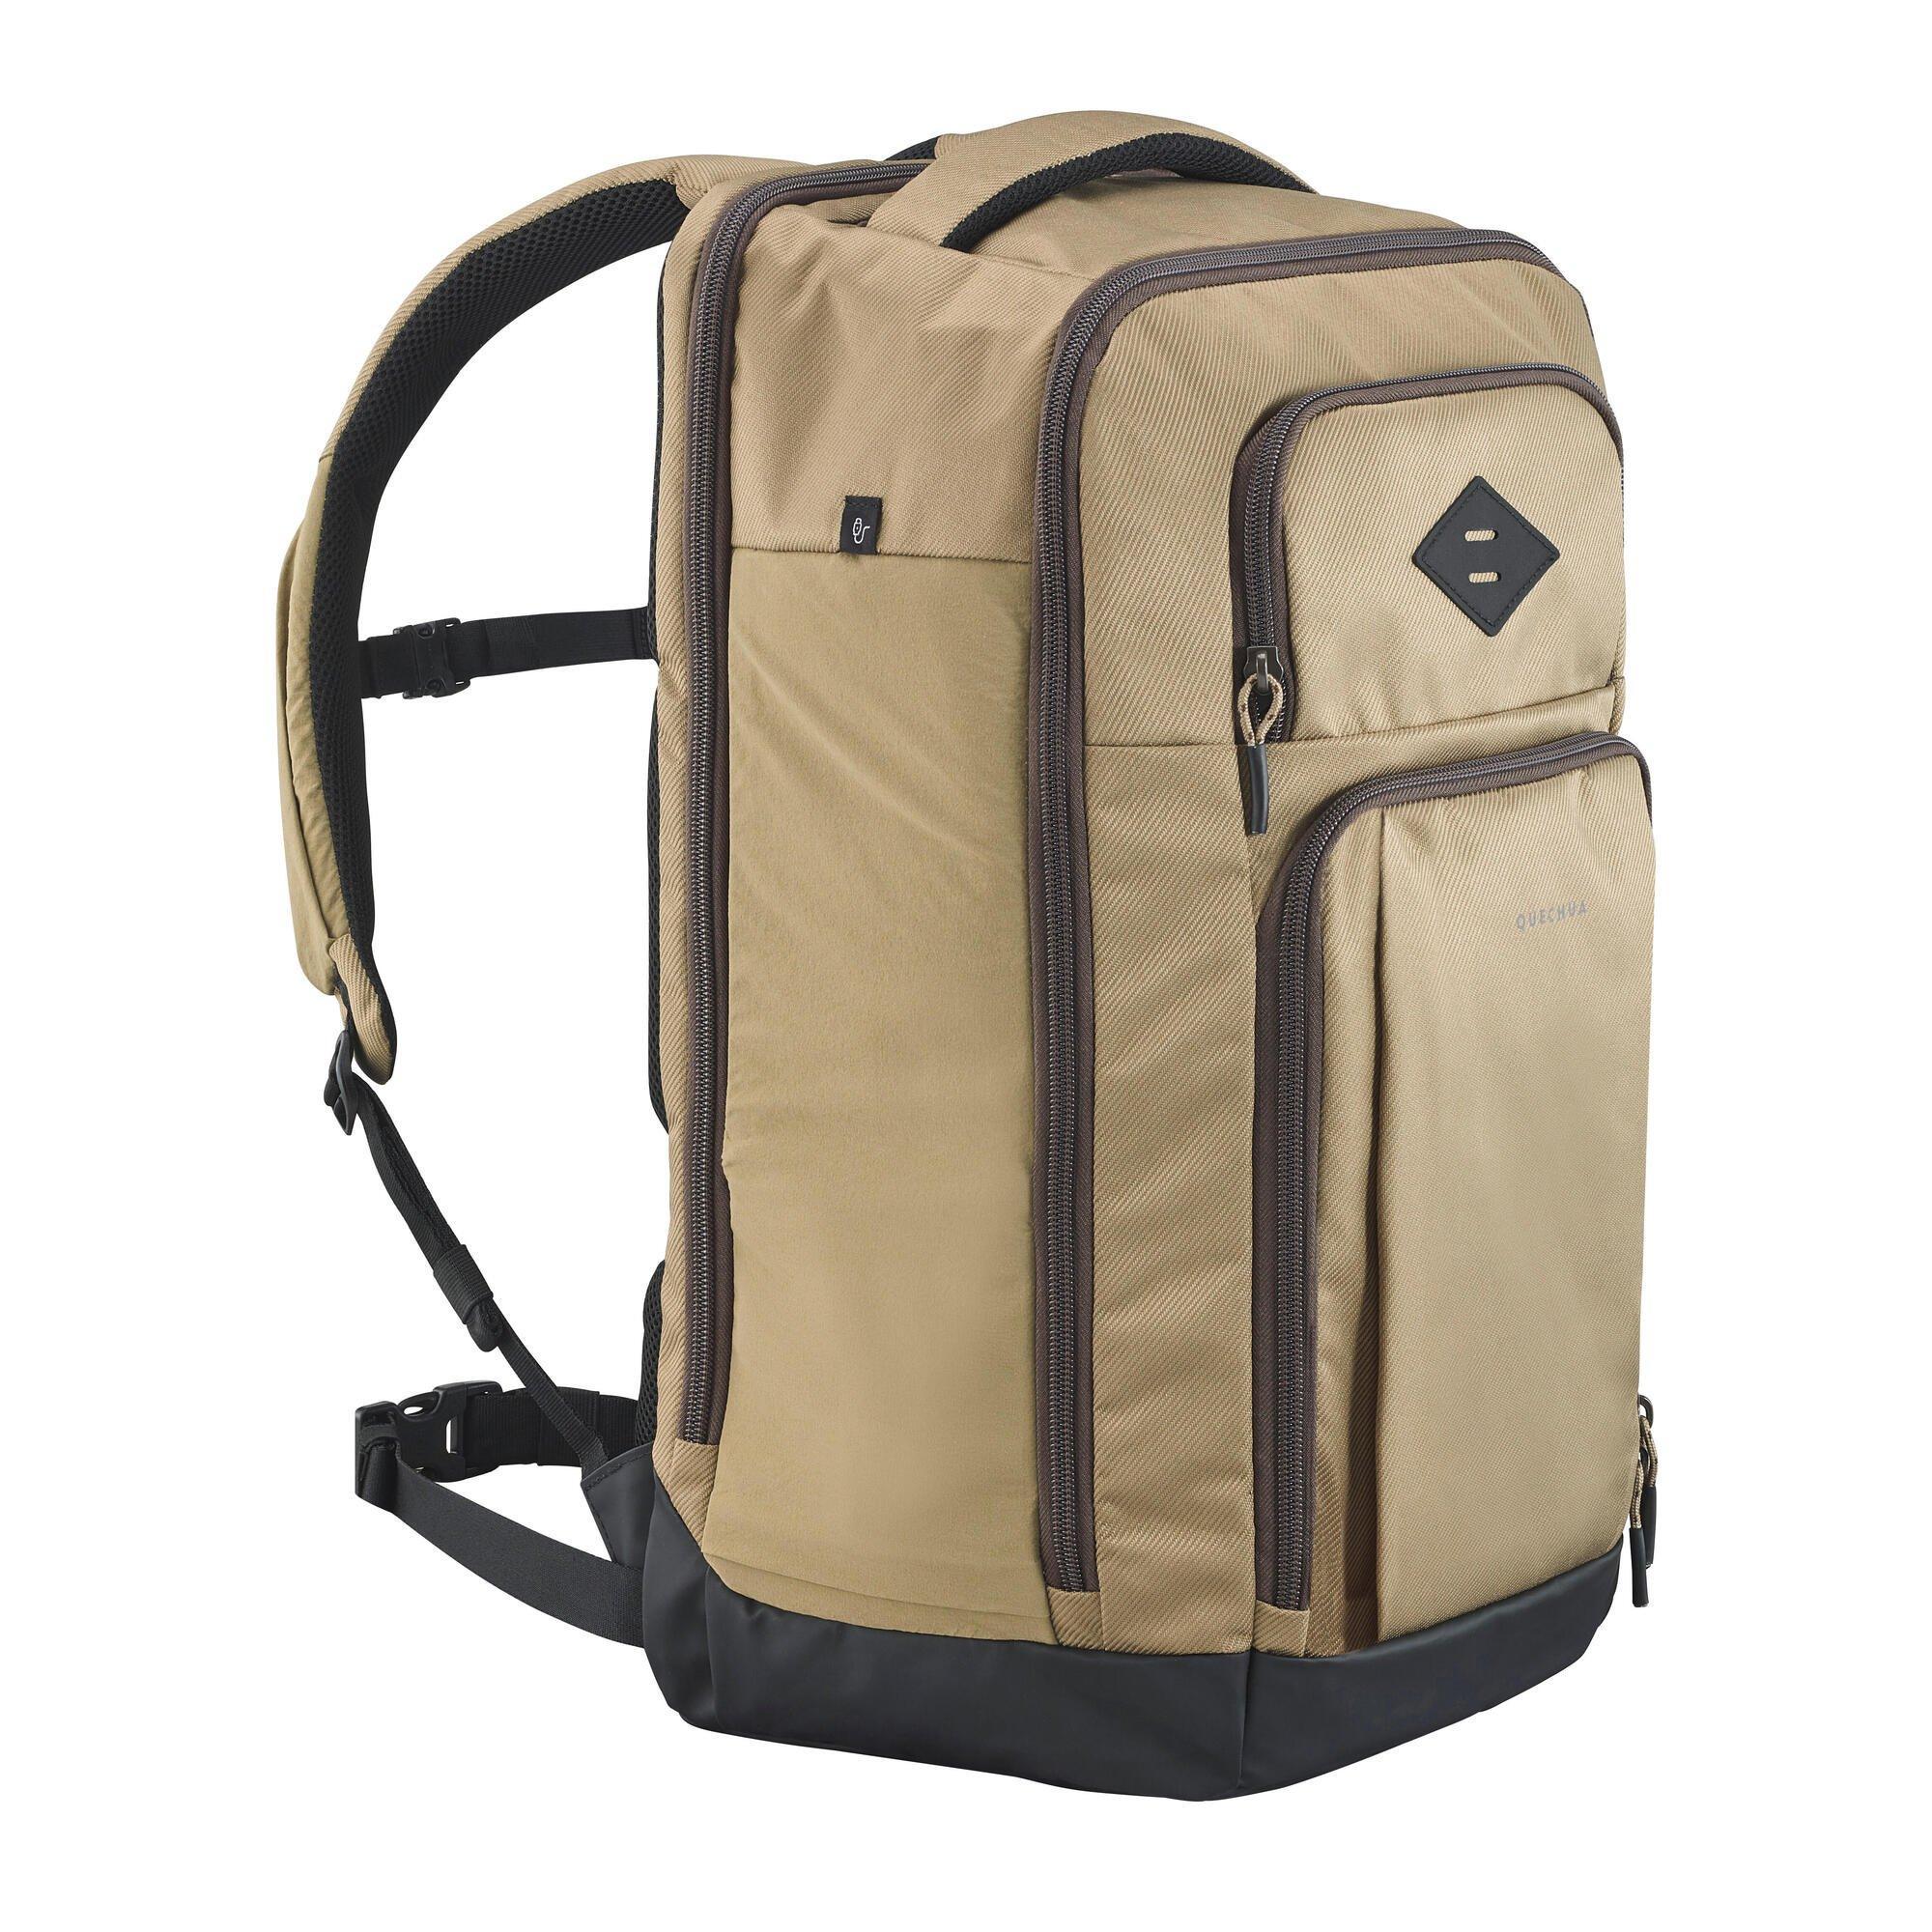 Quechua Arpenaz Laptop Bags Price Starting From Rs 2,089/Pc | Find Verified  Sellers at Justdial